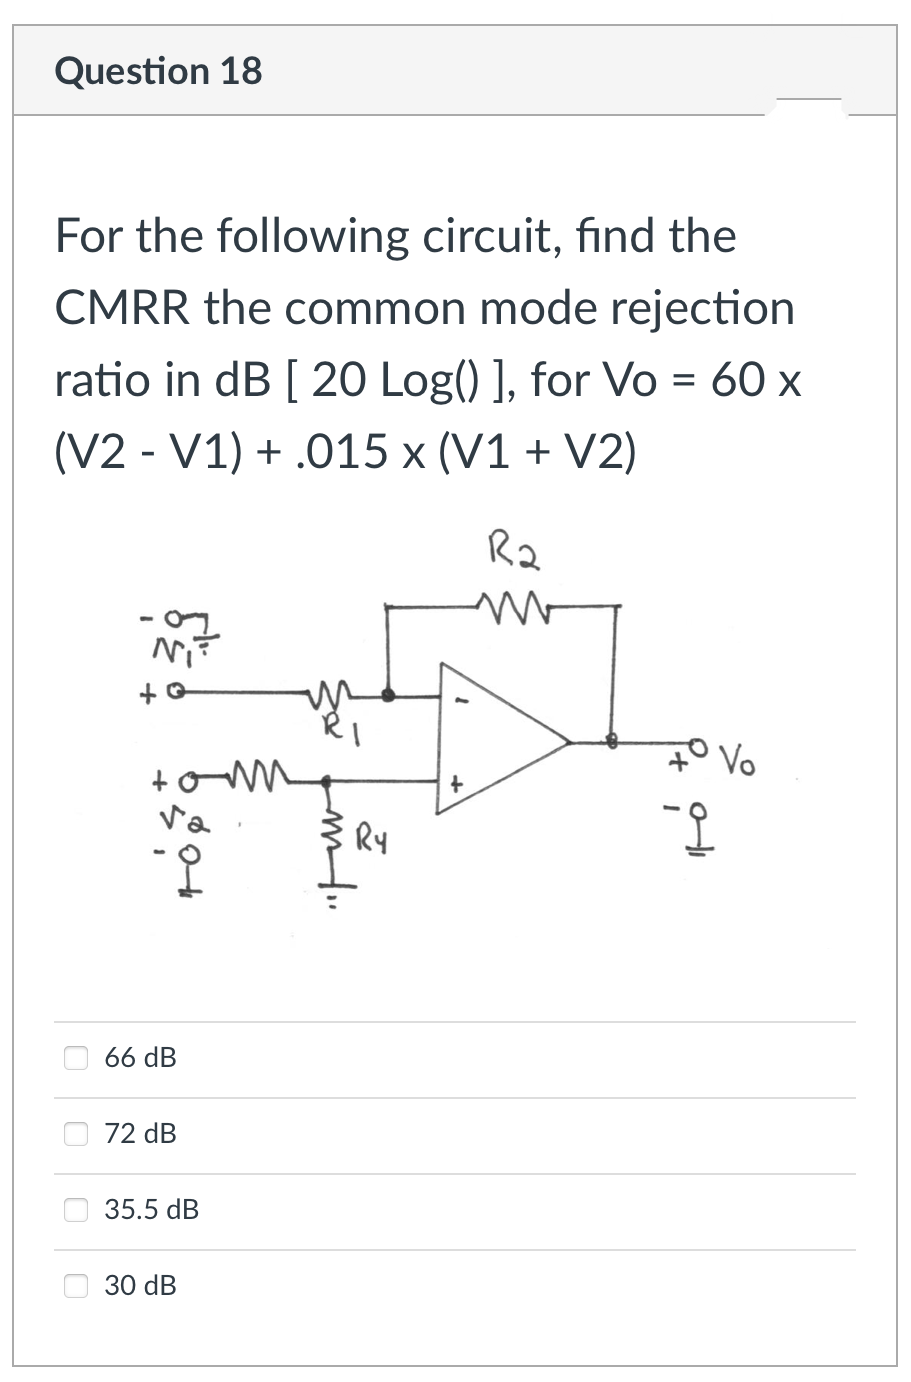 Question 18
For the following circuit, find the
CMRR the common mode rejection
ratio in dB [ 20 Log() ], for Vo = 60 x
(V2 - V1) + .015 x (V1 + V2)
R2
Ni
7° Vo
Ry
66 dB
72 dB
35.5 dB
O 30 dB
